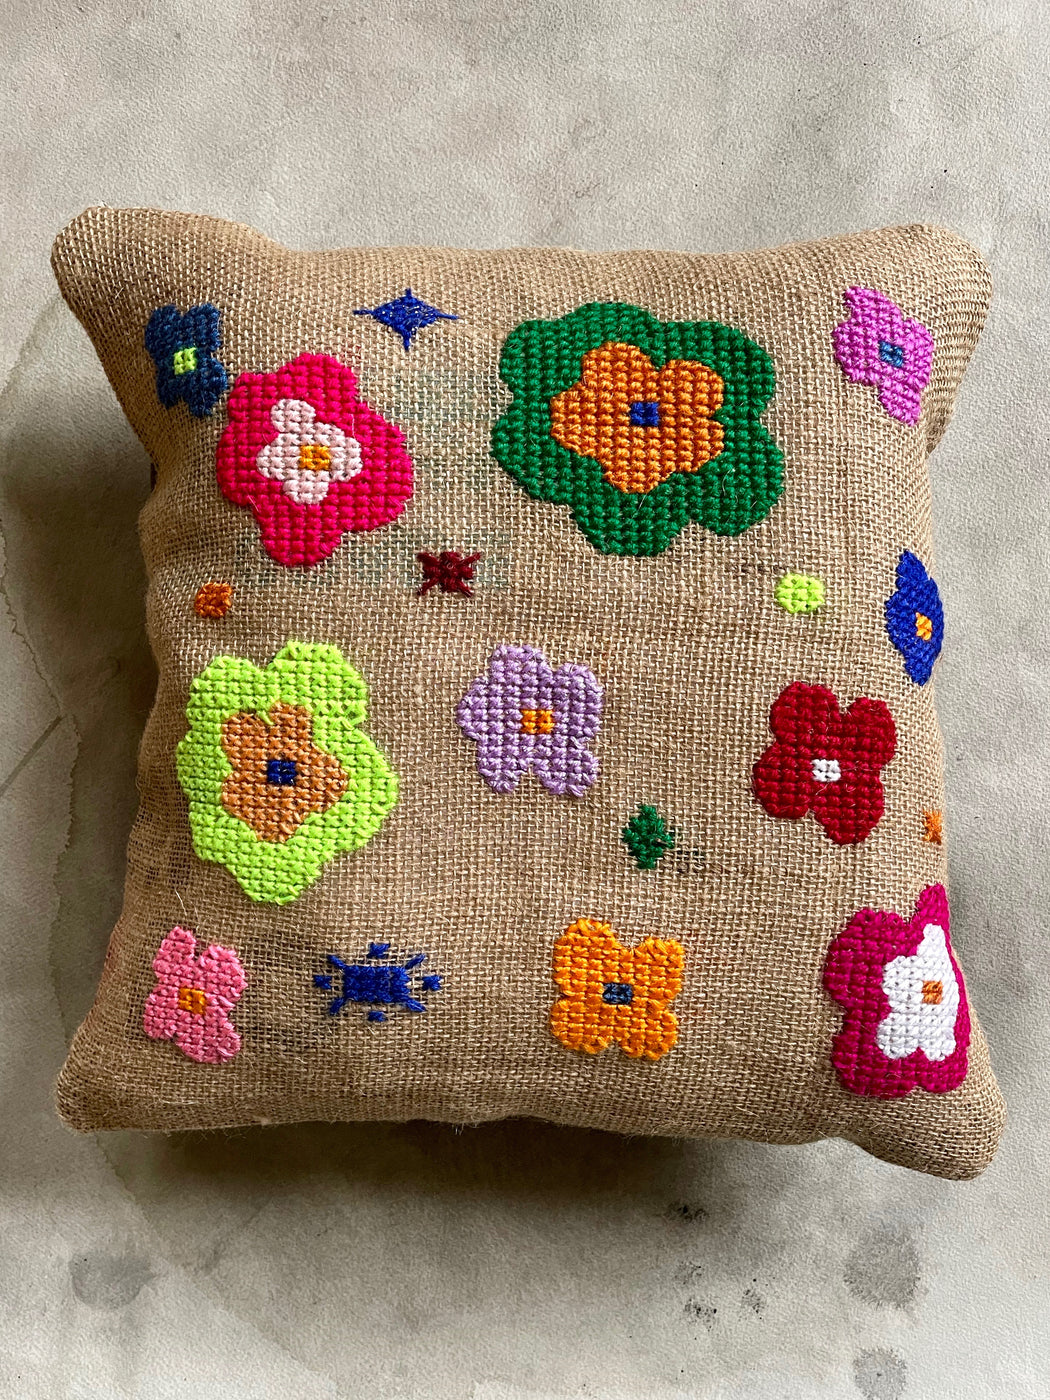 "Hippy" Hand-Embroidered Pillow by Nathalie Lete